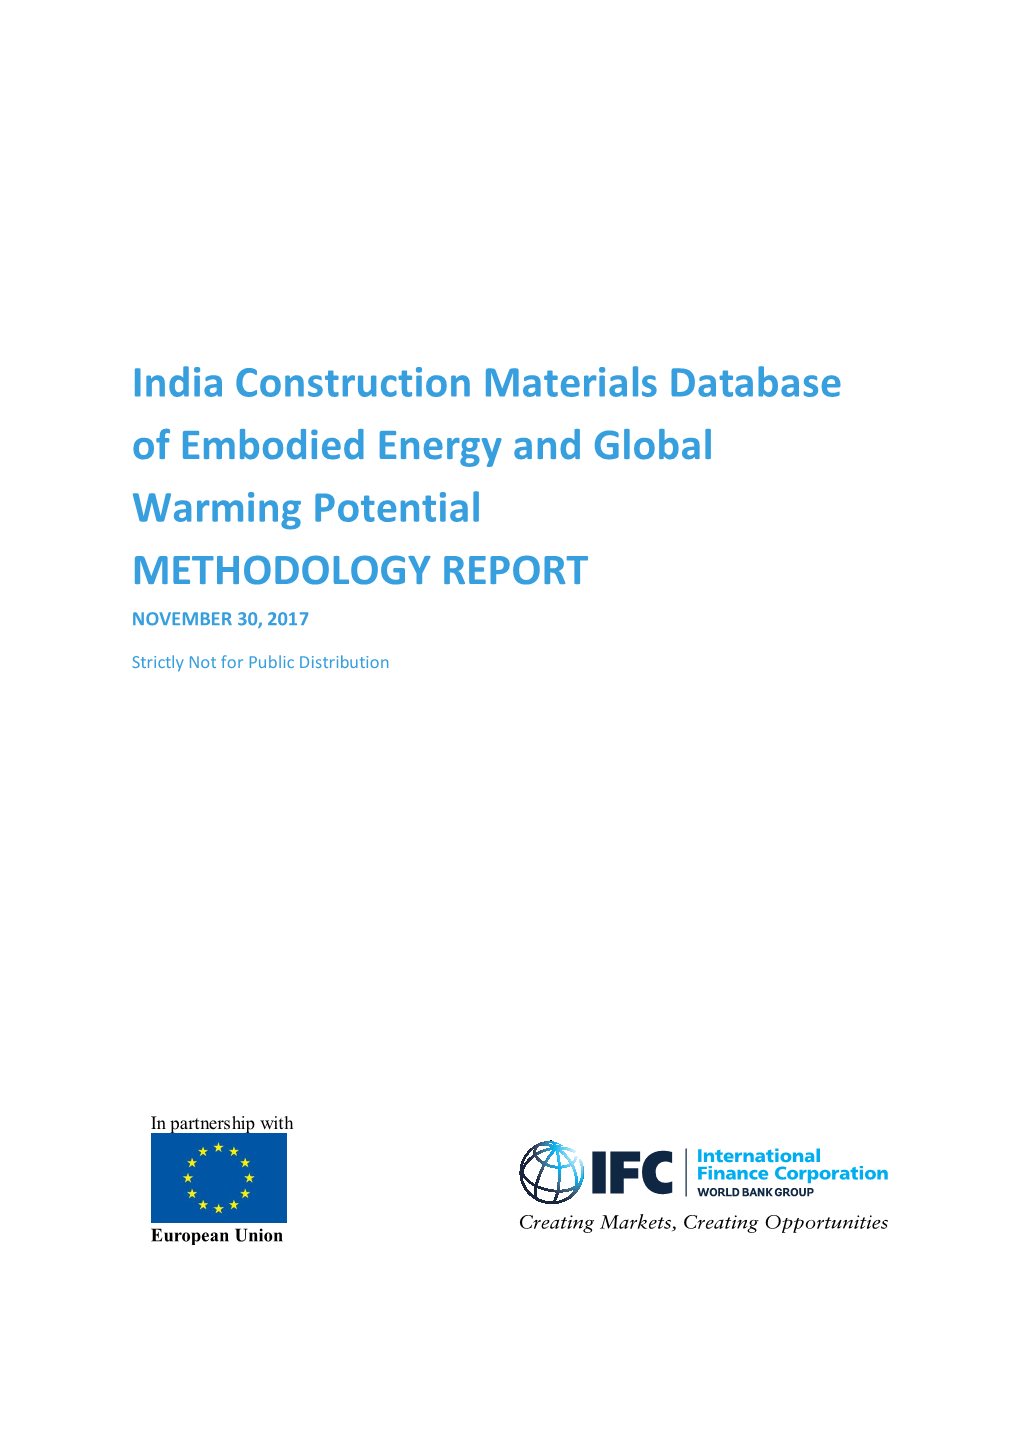 India Construction Materials Database of Embodied Energy and Global